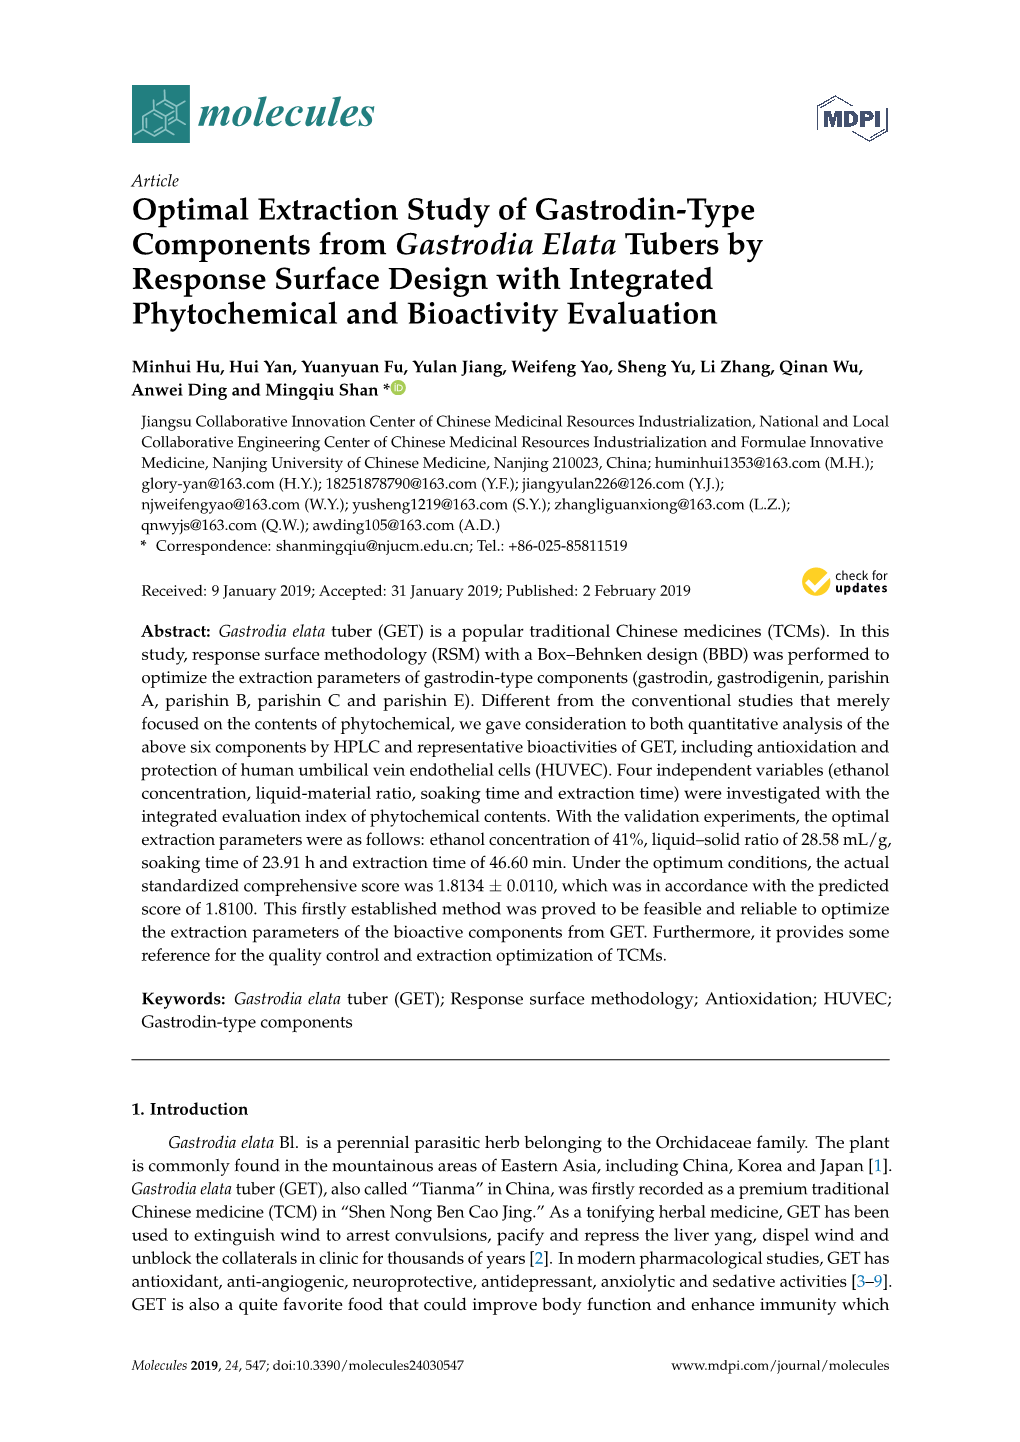 Optimal Extraction Study of Gastrodin-Type Components from Gastrodia Elata Tubers by Response Surface Design with Integrated Phytochemical and Bioactivity Evaluation